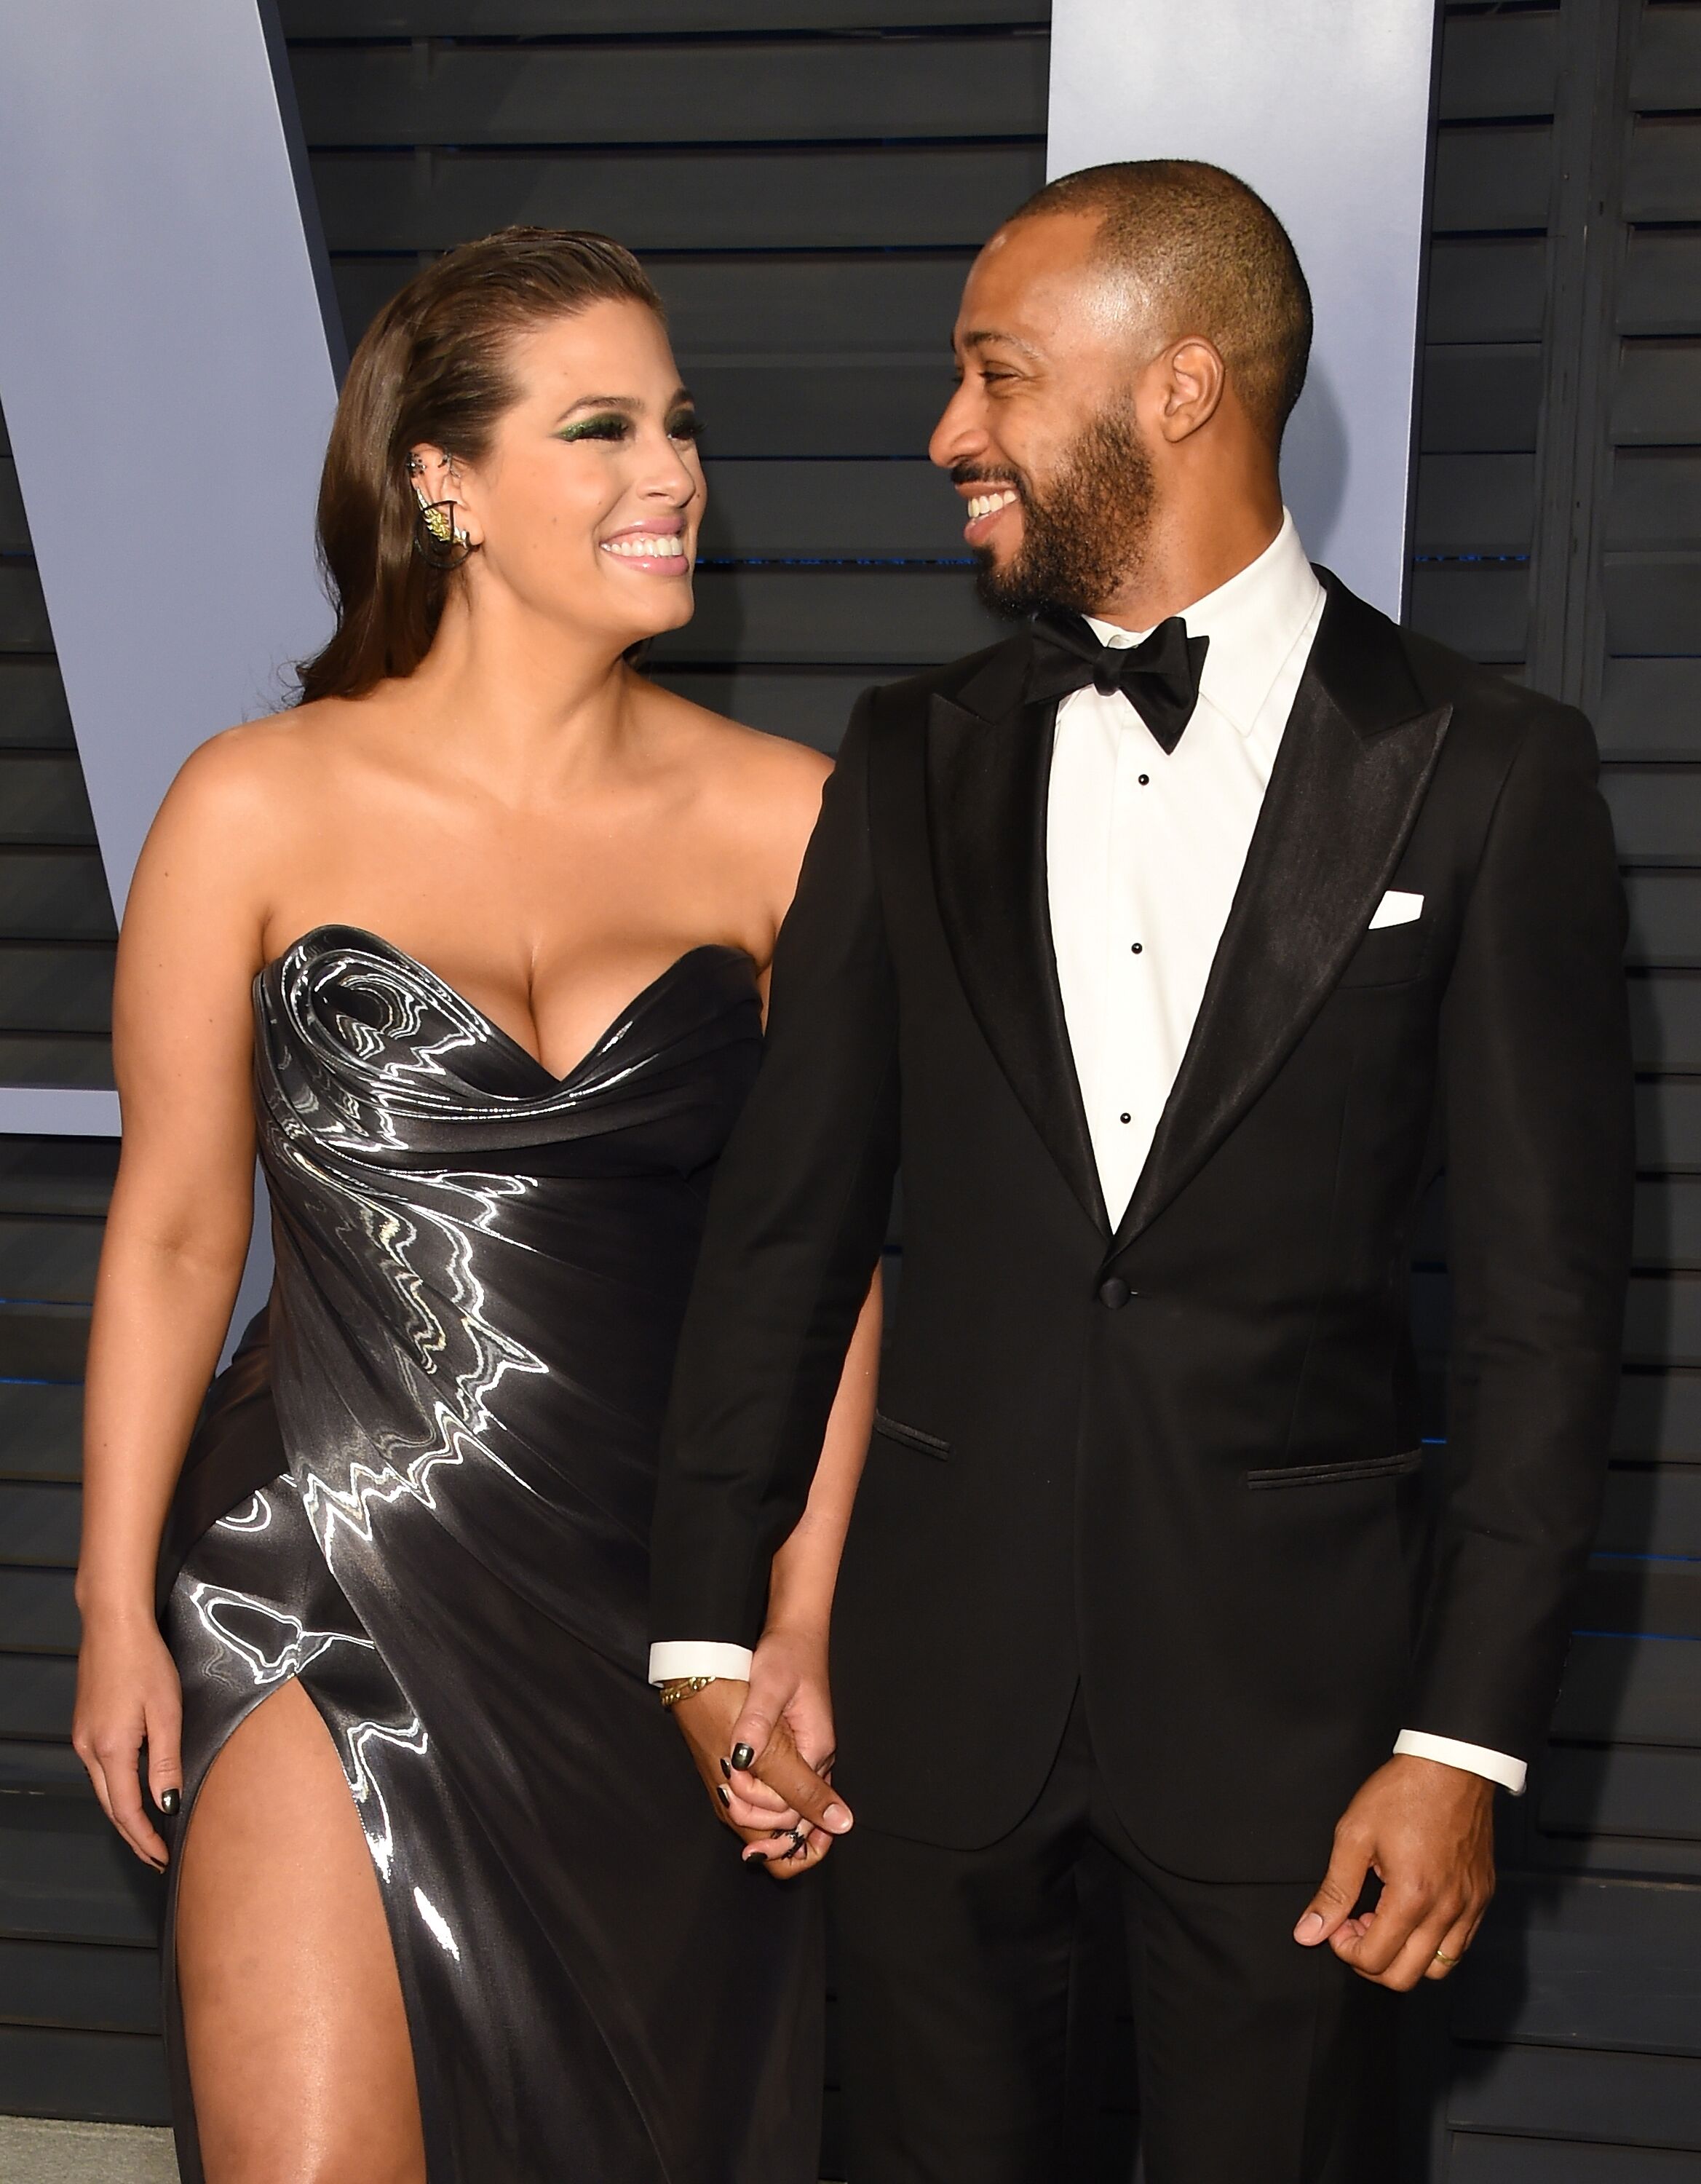 Ashley Graham and Justin Ervin attend the 2018 Vanity Fair Oscar Party hosted by Radhika Jones at the Wallis Annenberg Center for the Performing Arts on March 4, 2018 in Beverly Hills, California | Photo: Getty Images